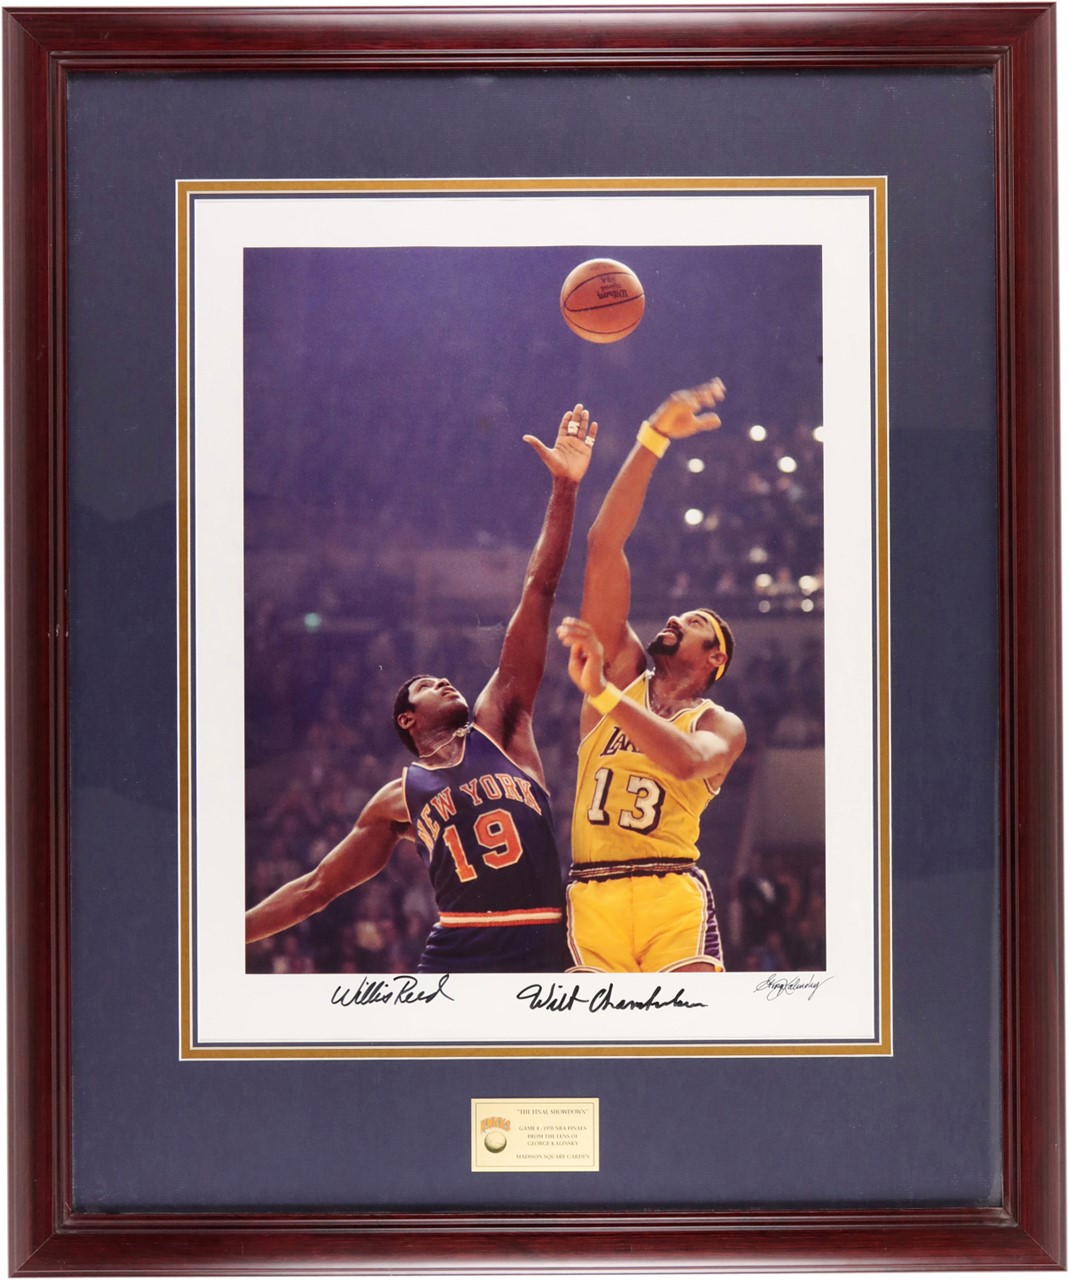 - Wilt Chamberlain & Willis Reed Signed 1970 NBA Finals "The Final Showdown" Large-Format Photo by George Kalinsky